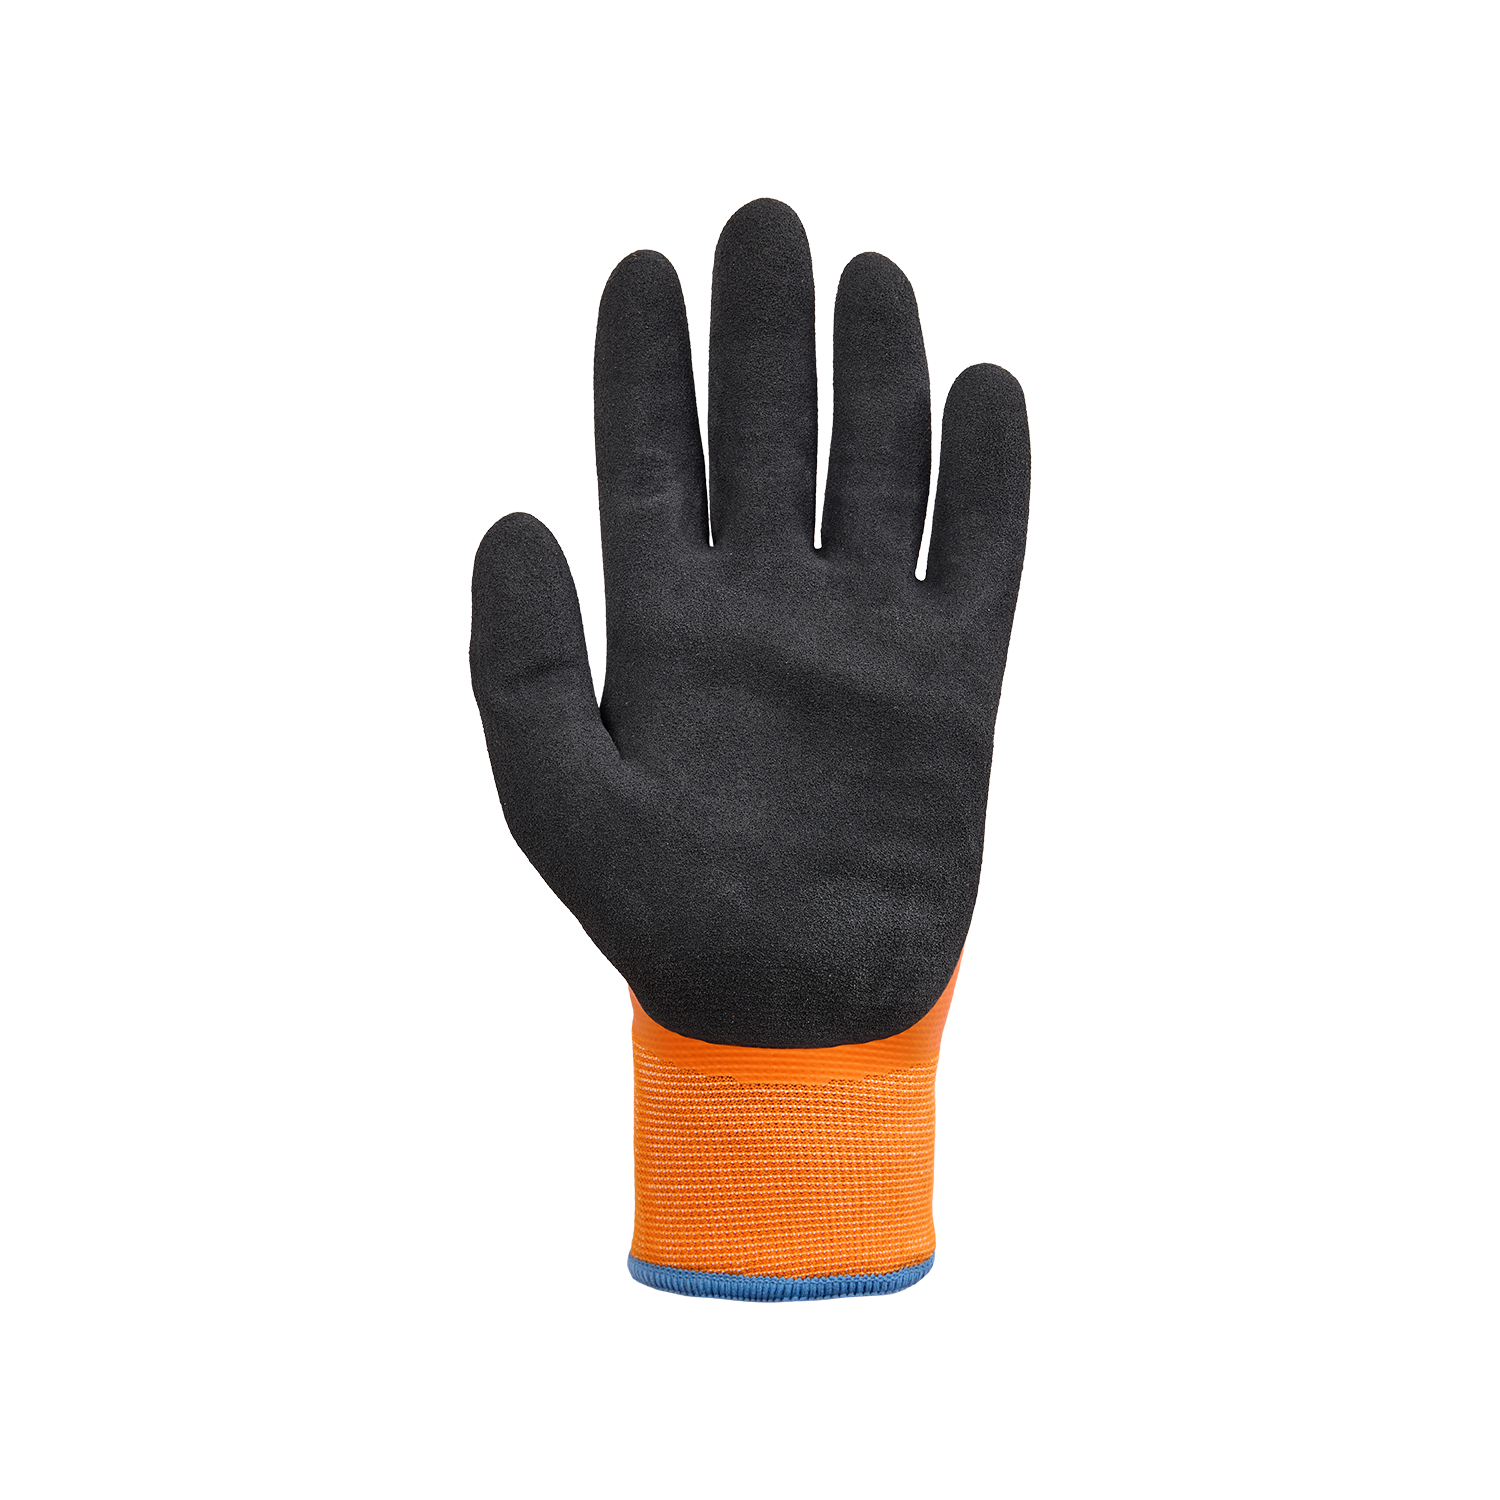 NORSE Arctic waterproof winter assembly gloves size 9